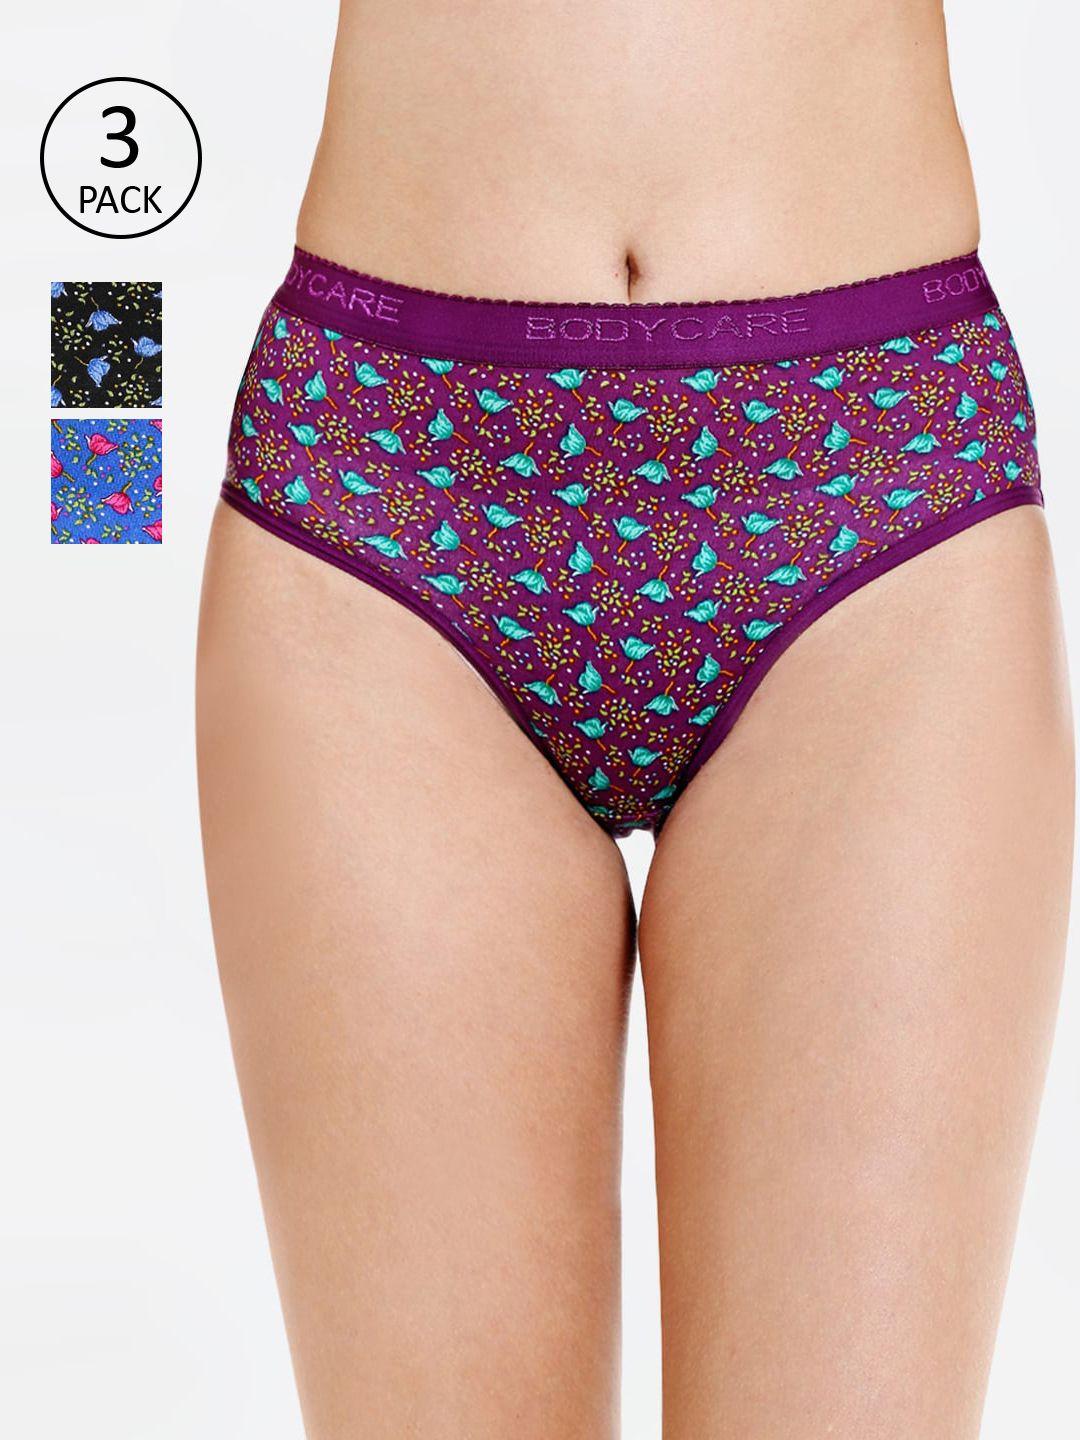 bodycare women plus size pack of 3 printed hipster briefs